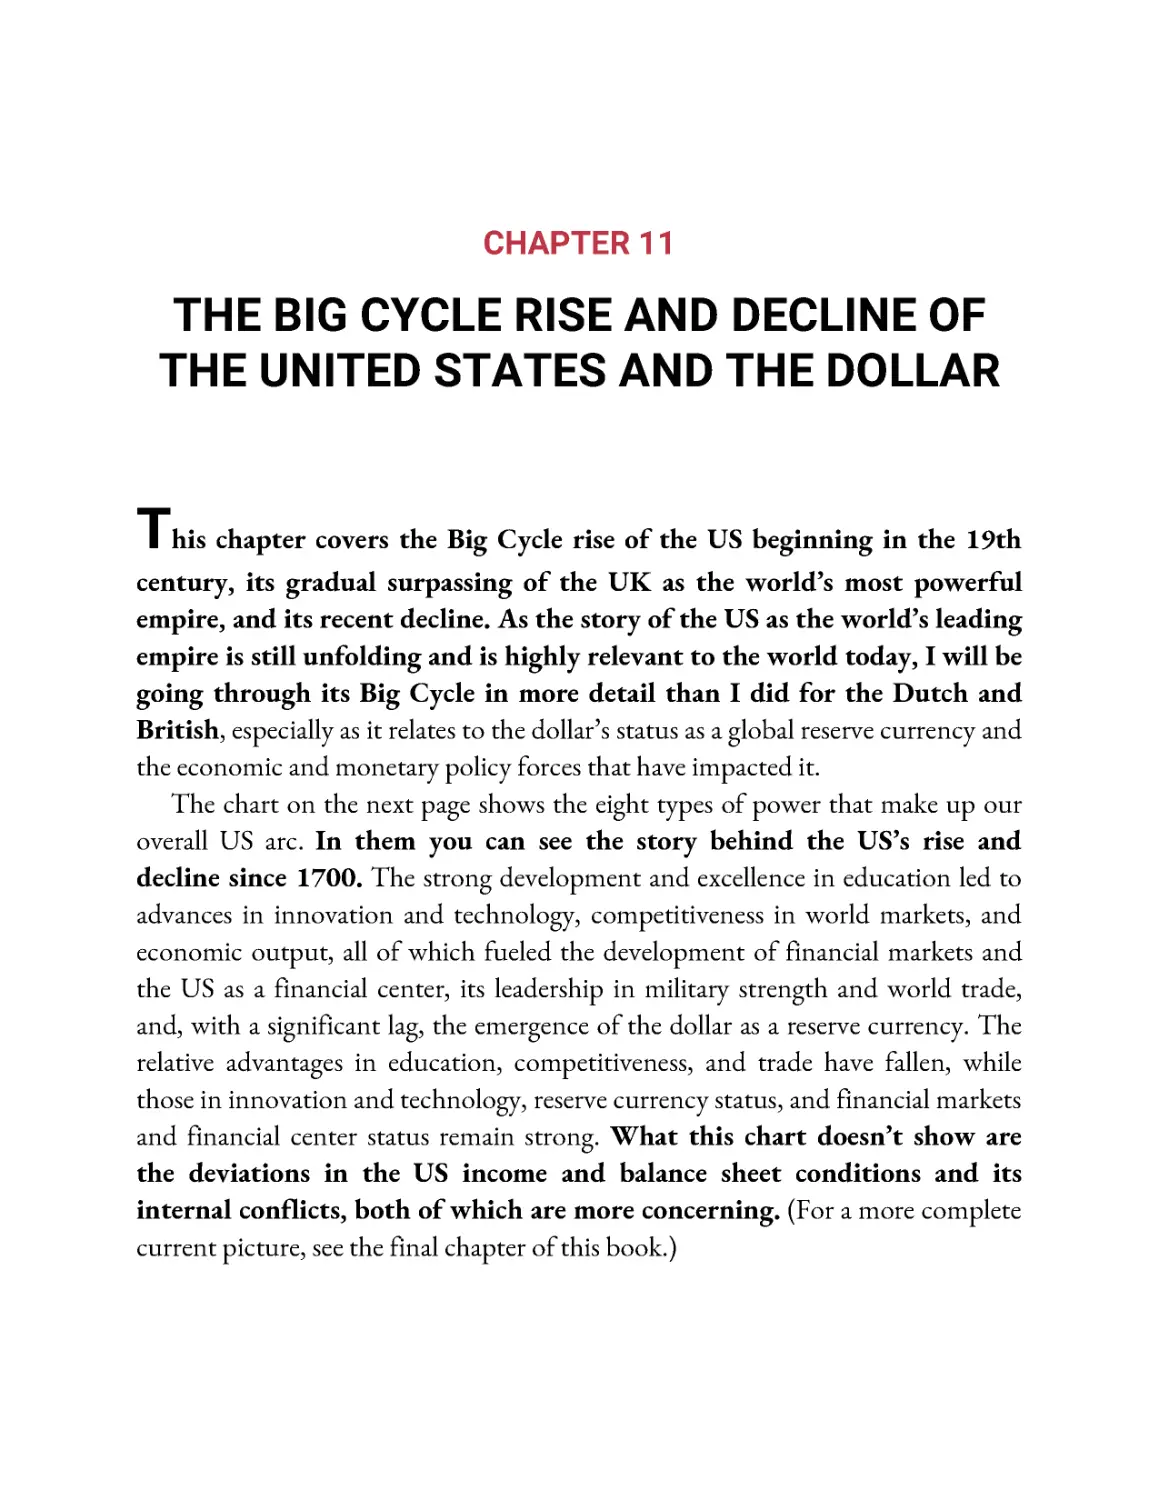 ﻿Chapter 11: The Big Cycle Rise and Decline of the United States and the Dolla